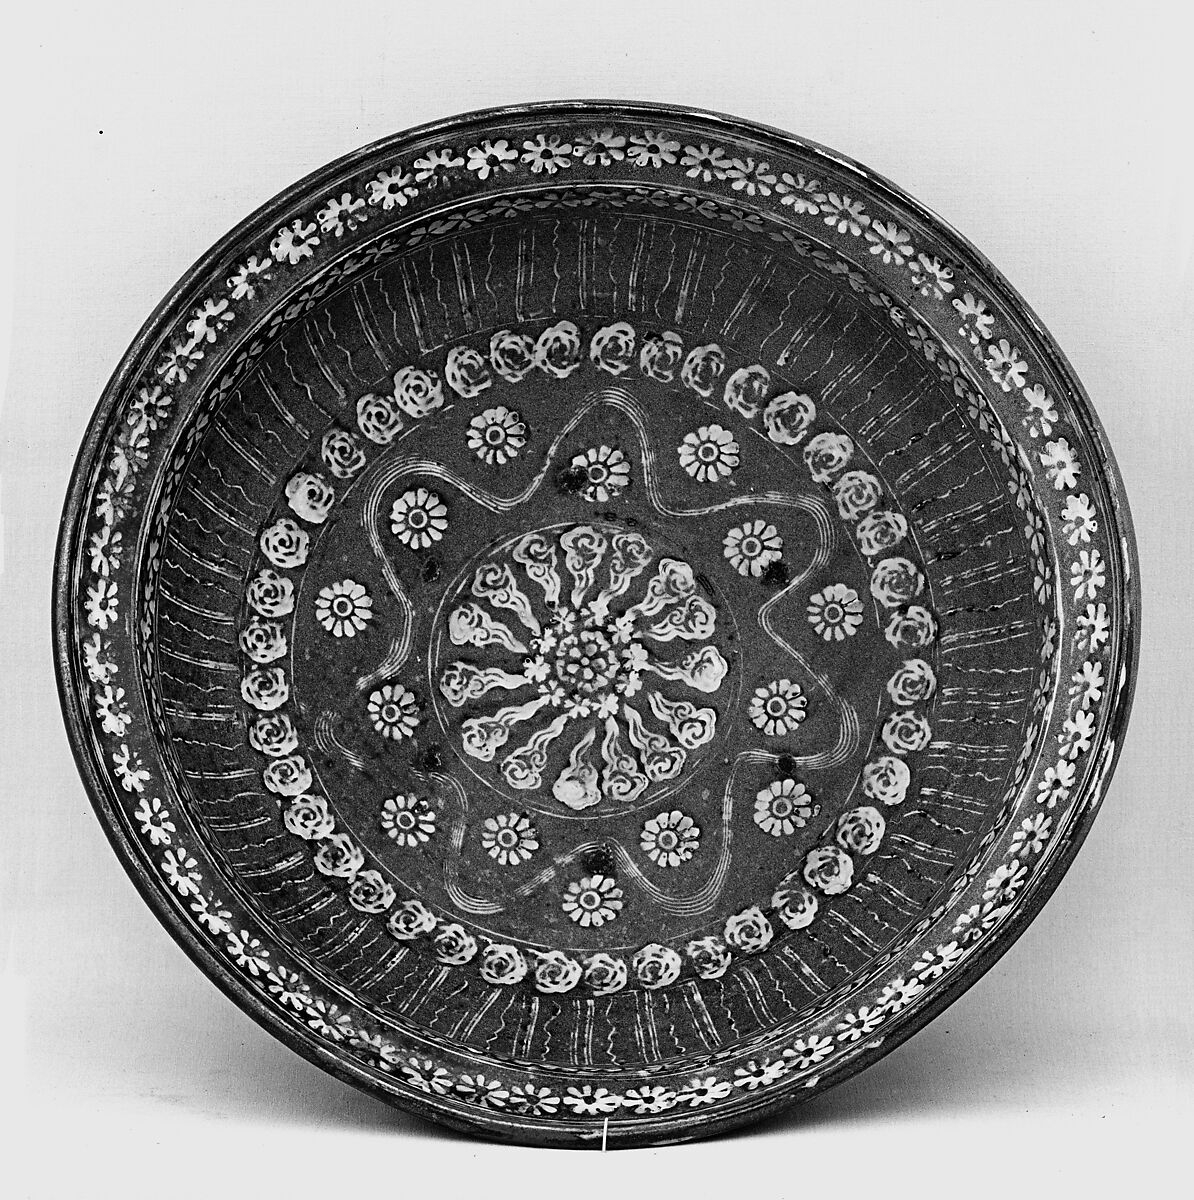 Bowl, Pottery with designs inlaid in the paste and covered with transparent glaze (Yatsushiro ware), Japan 